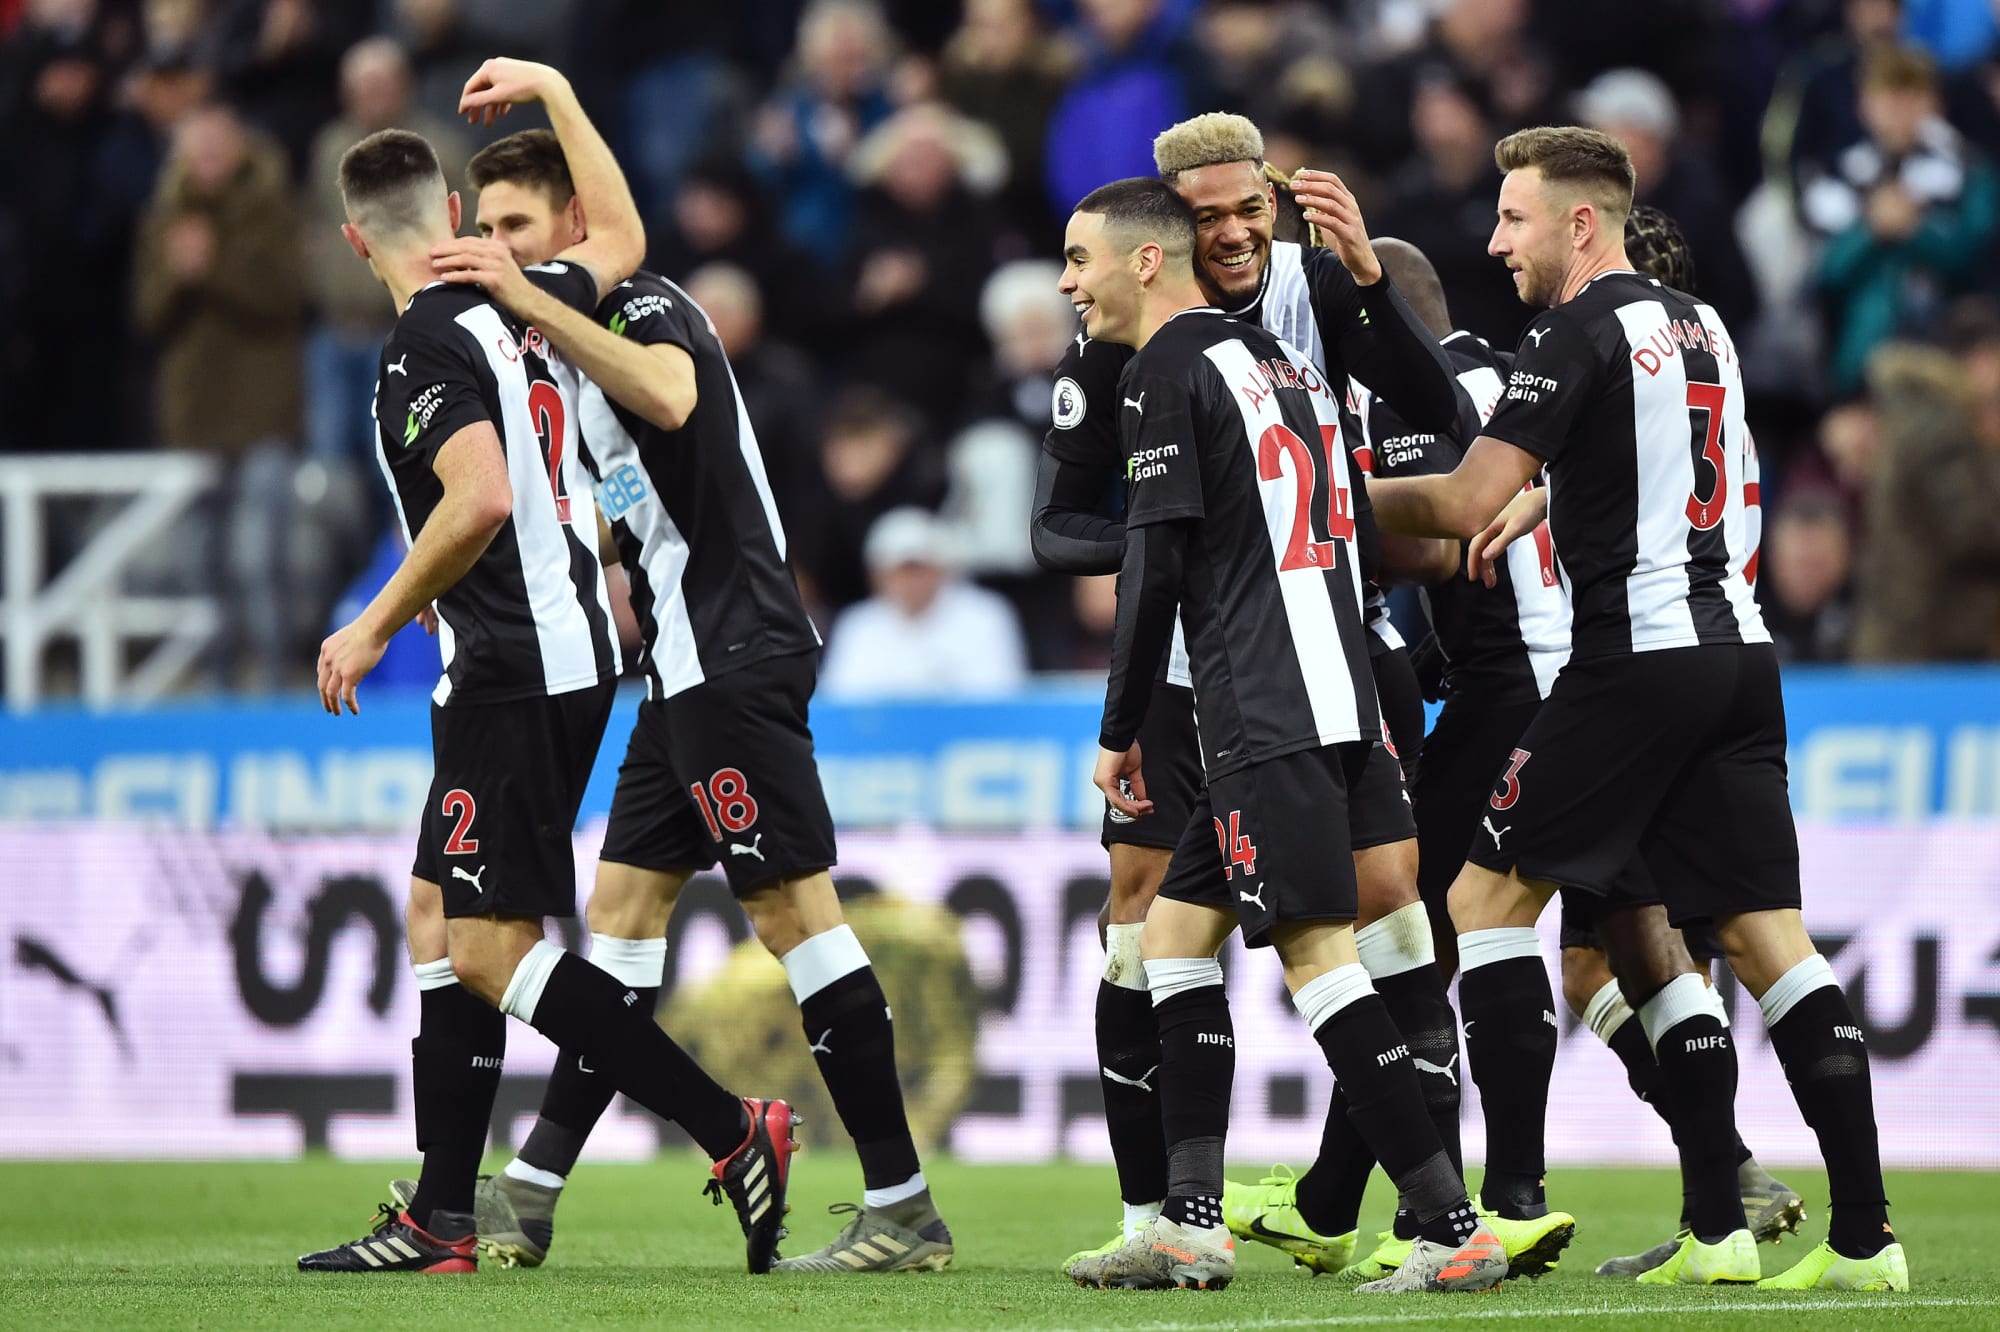 Predicting how Newcastle will fare in their next 3 games